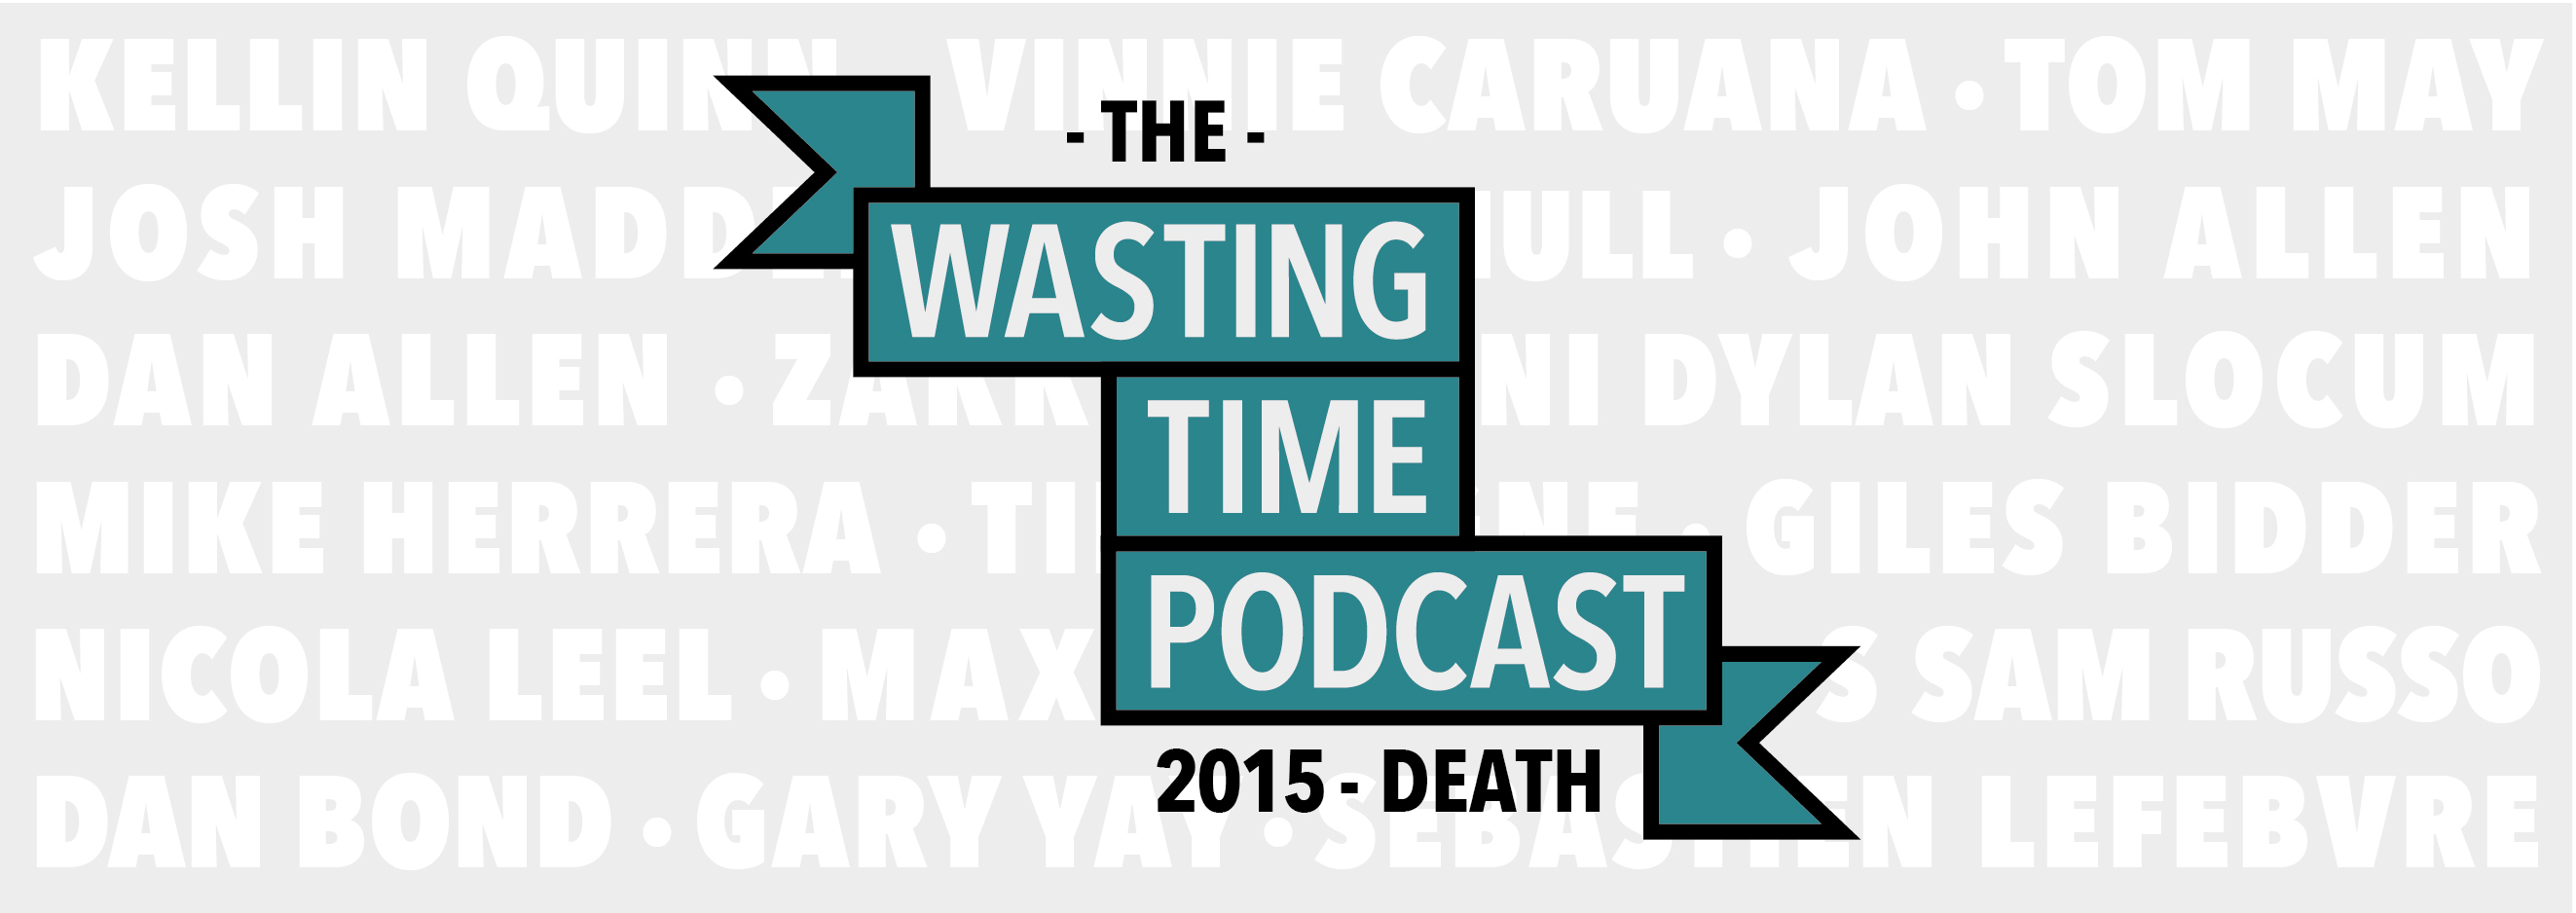 The Wasting Time Podcast header image 1